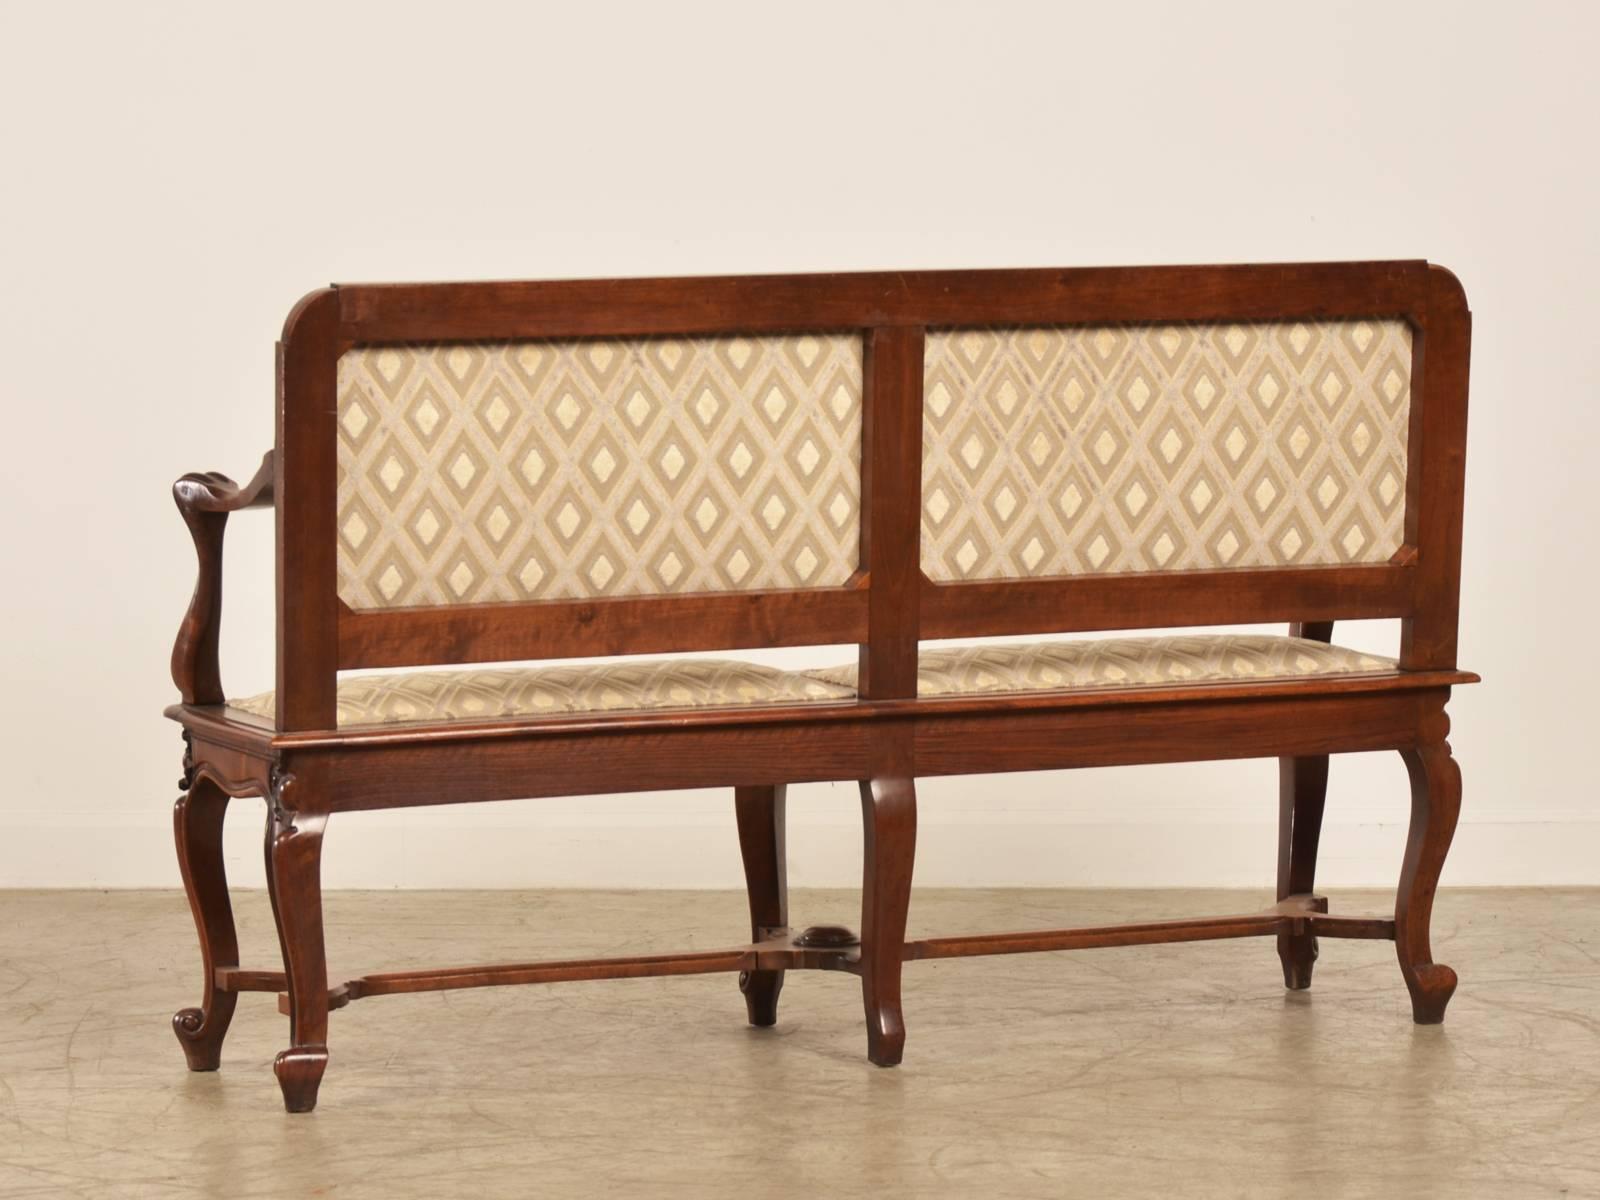 Antique French Art Nouveau Period Walnut Settee Bench, circa 1900 In Excellent Condition For Sale In Houston, TX